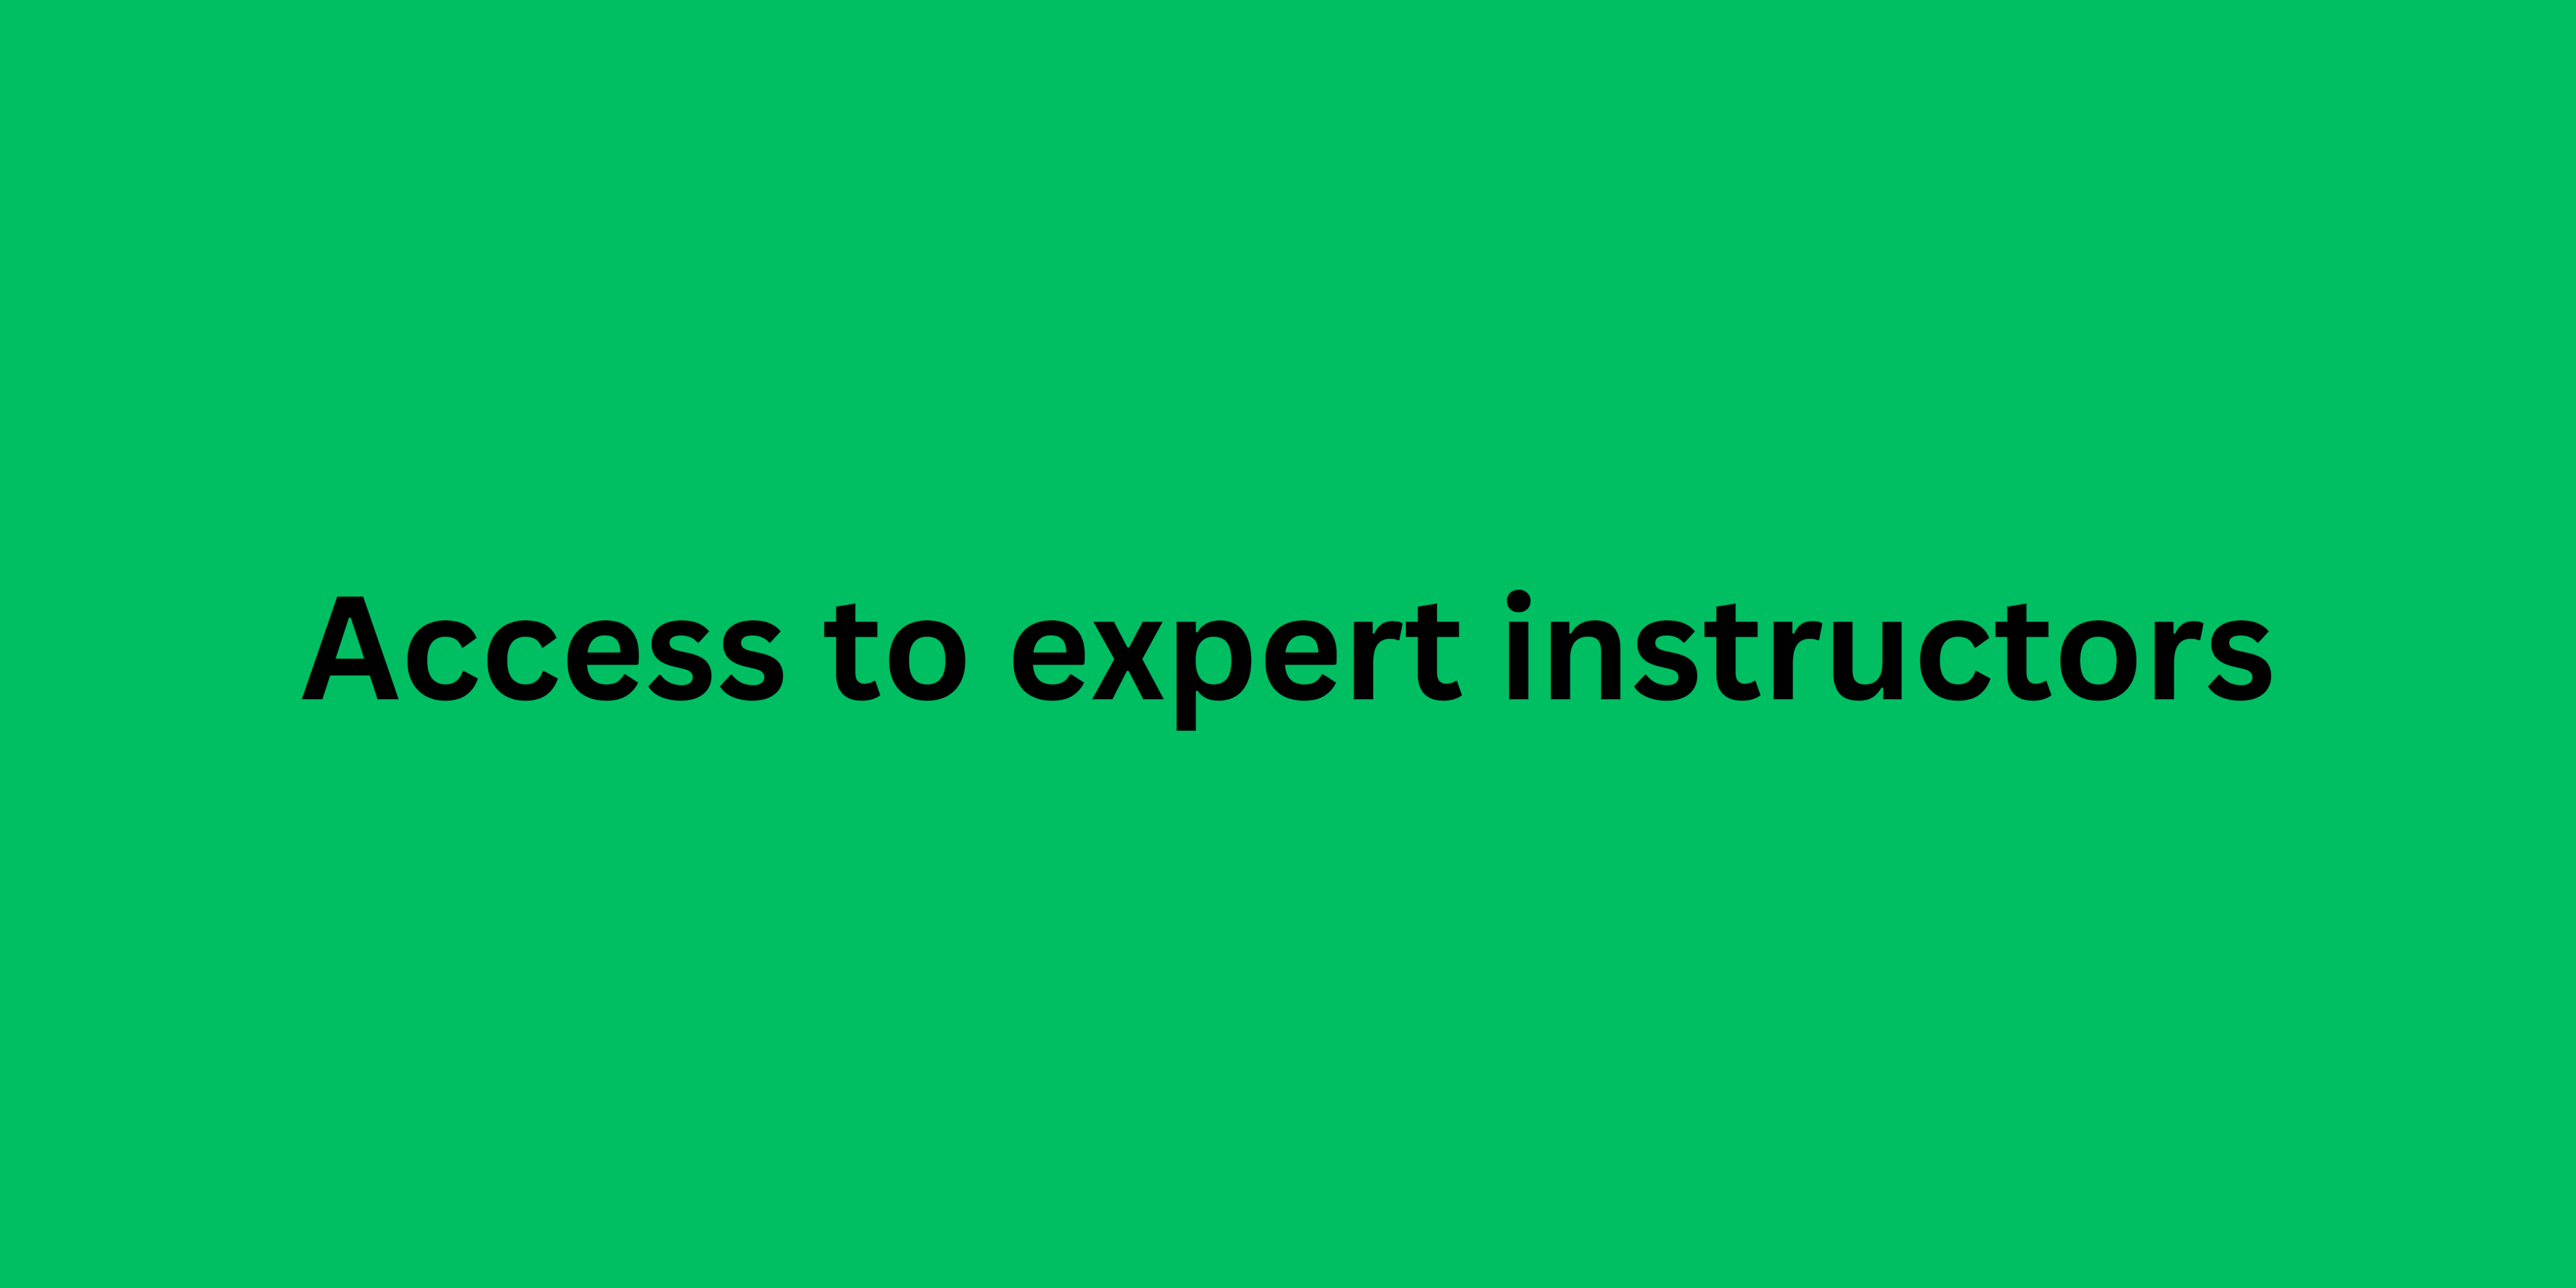 Access to expert instructors